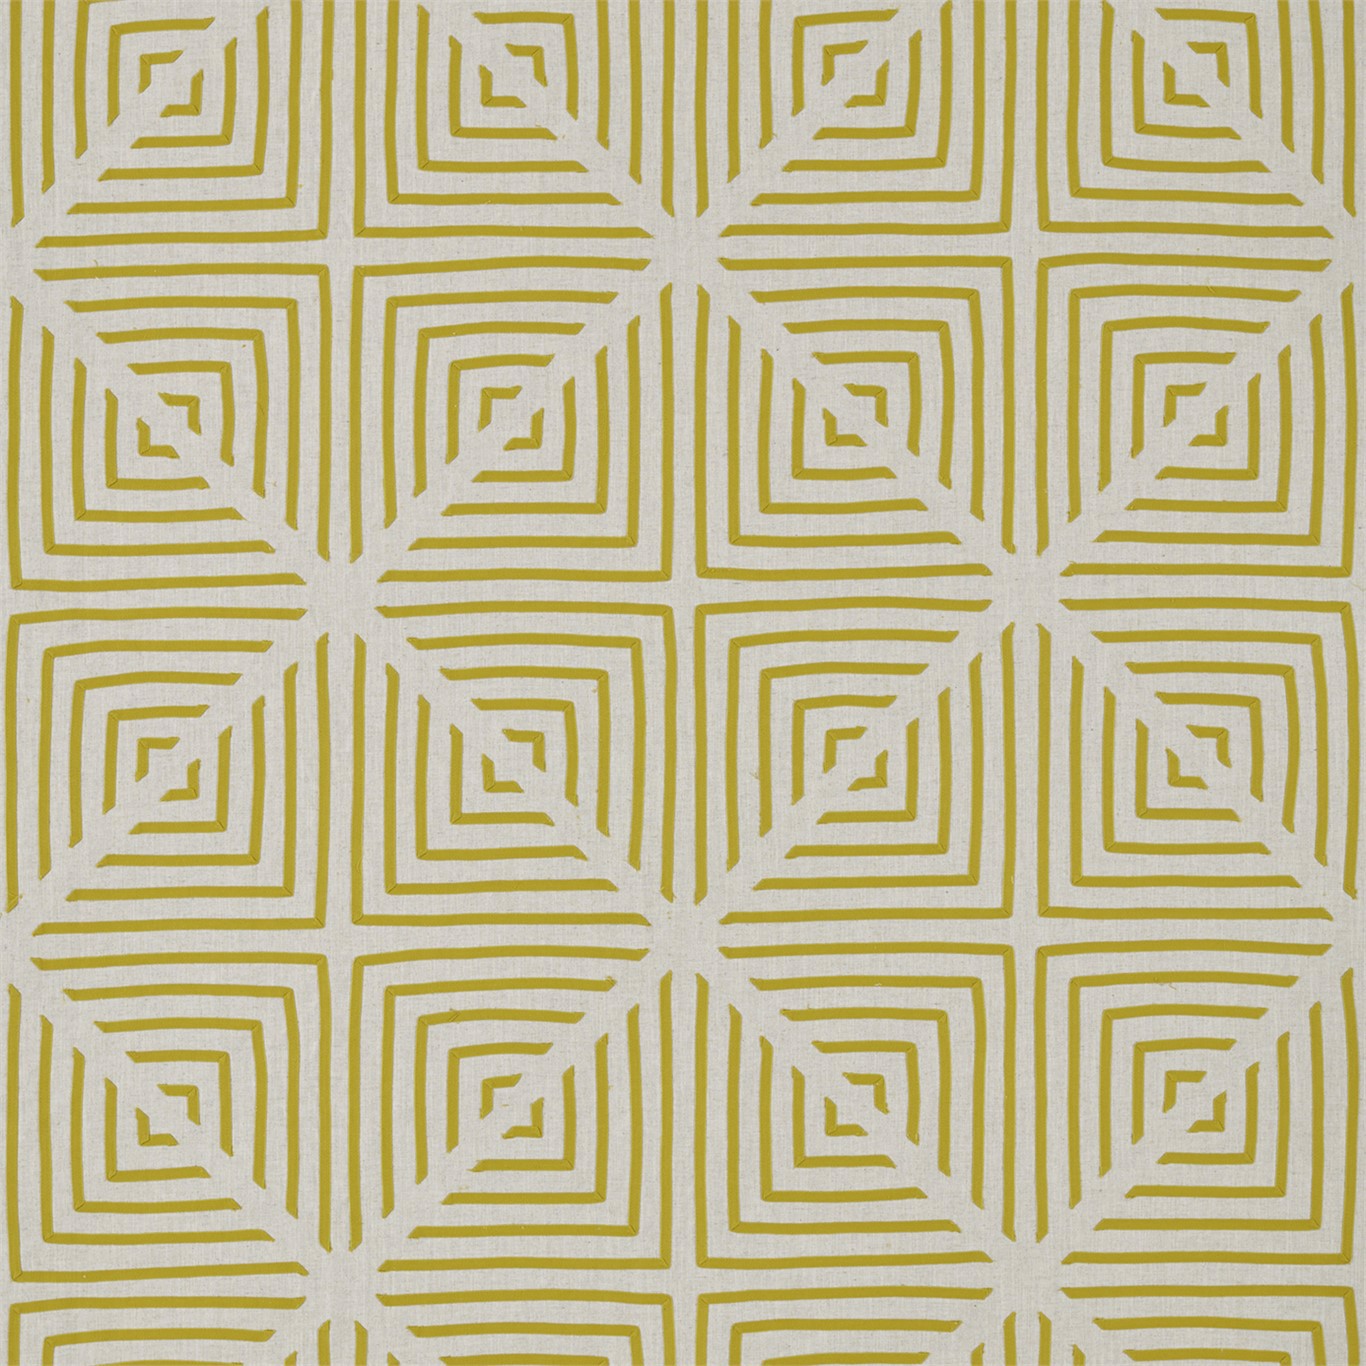 Radial Linen/Zest Fabric by HAR